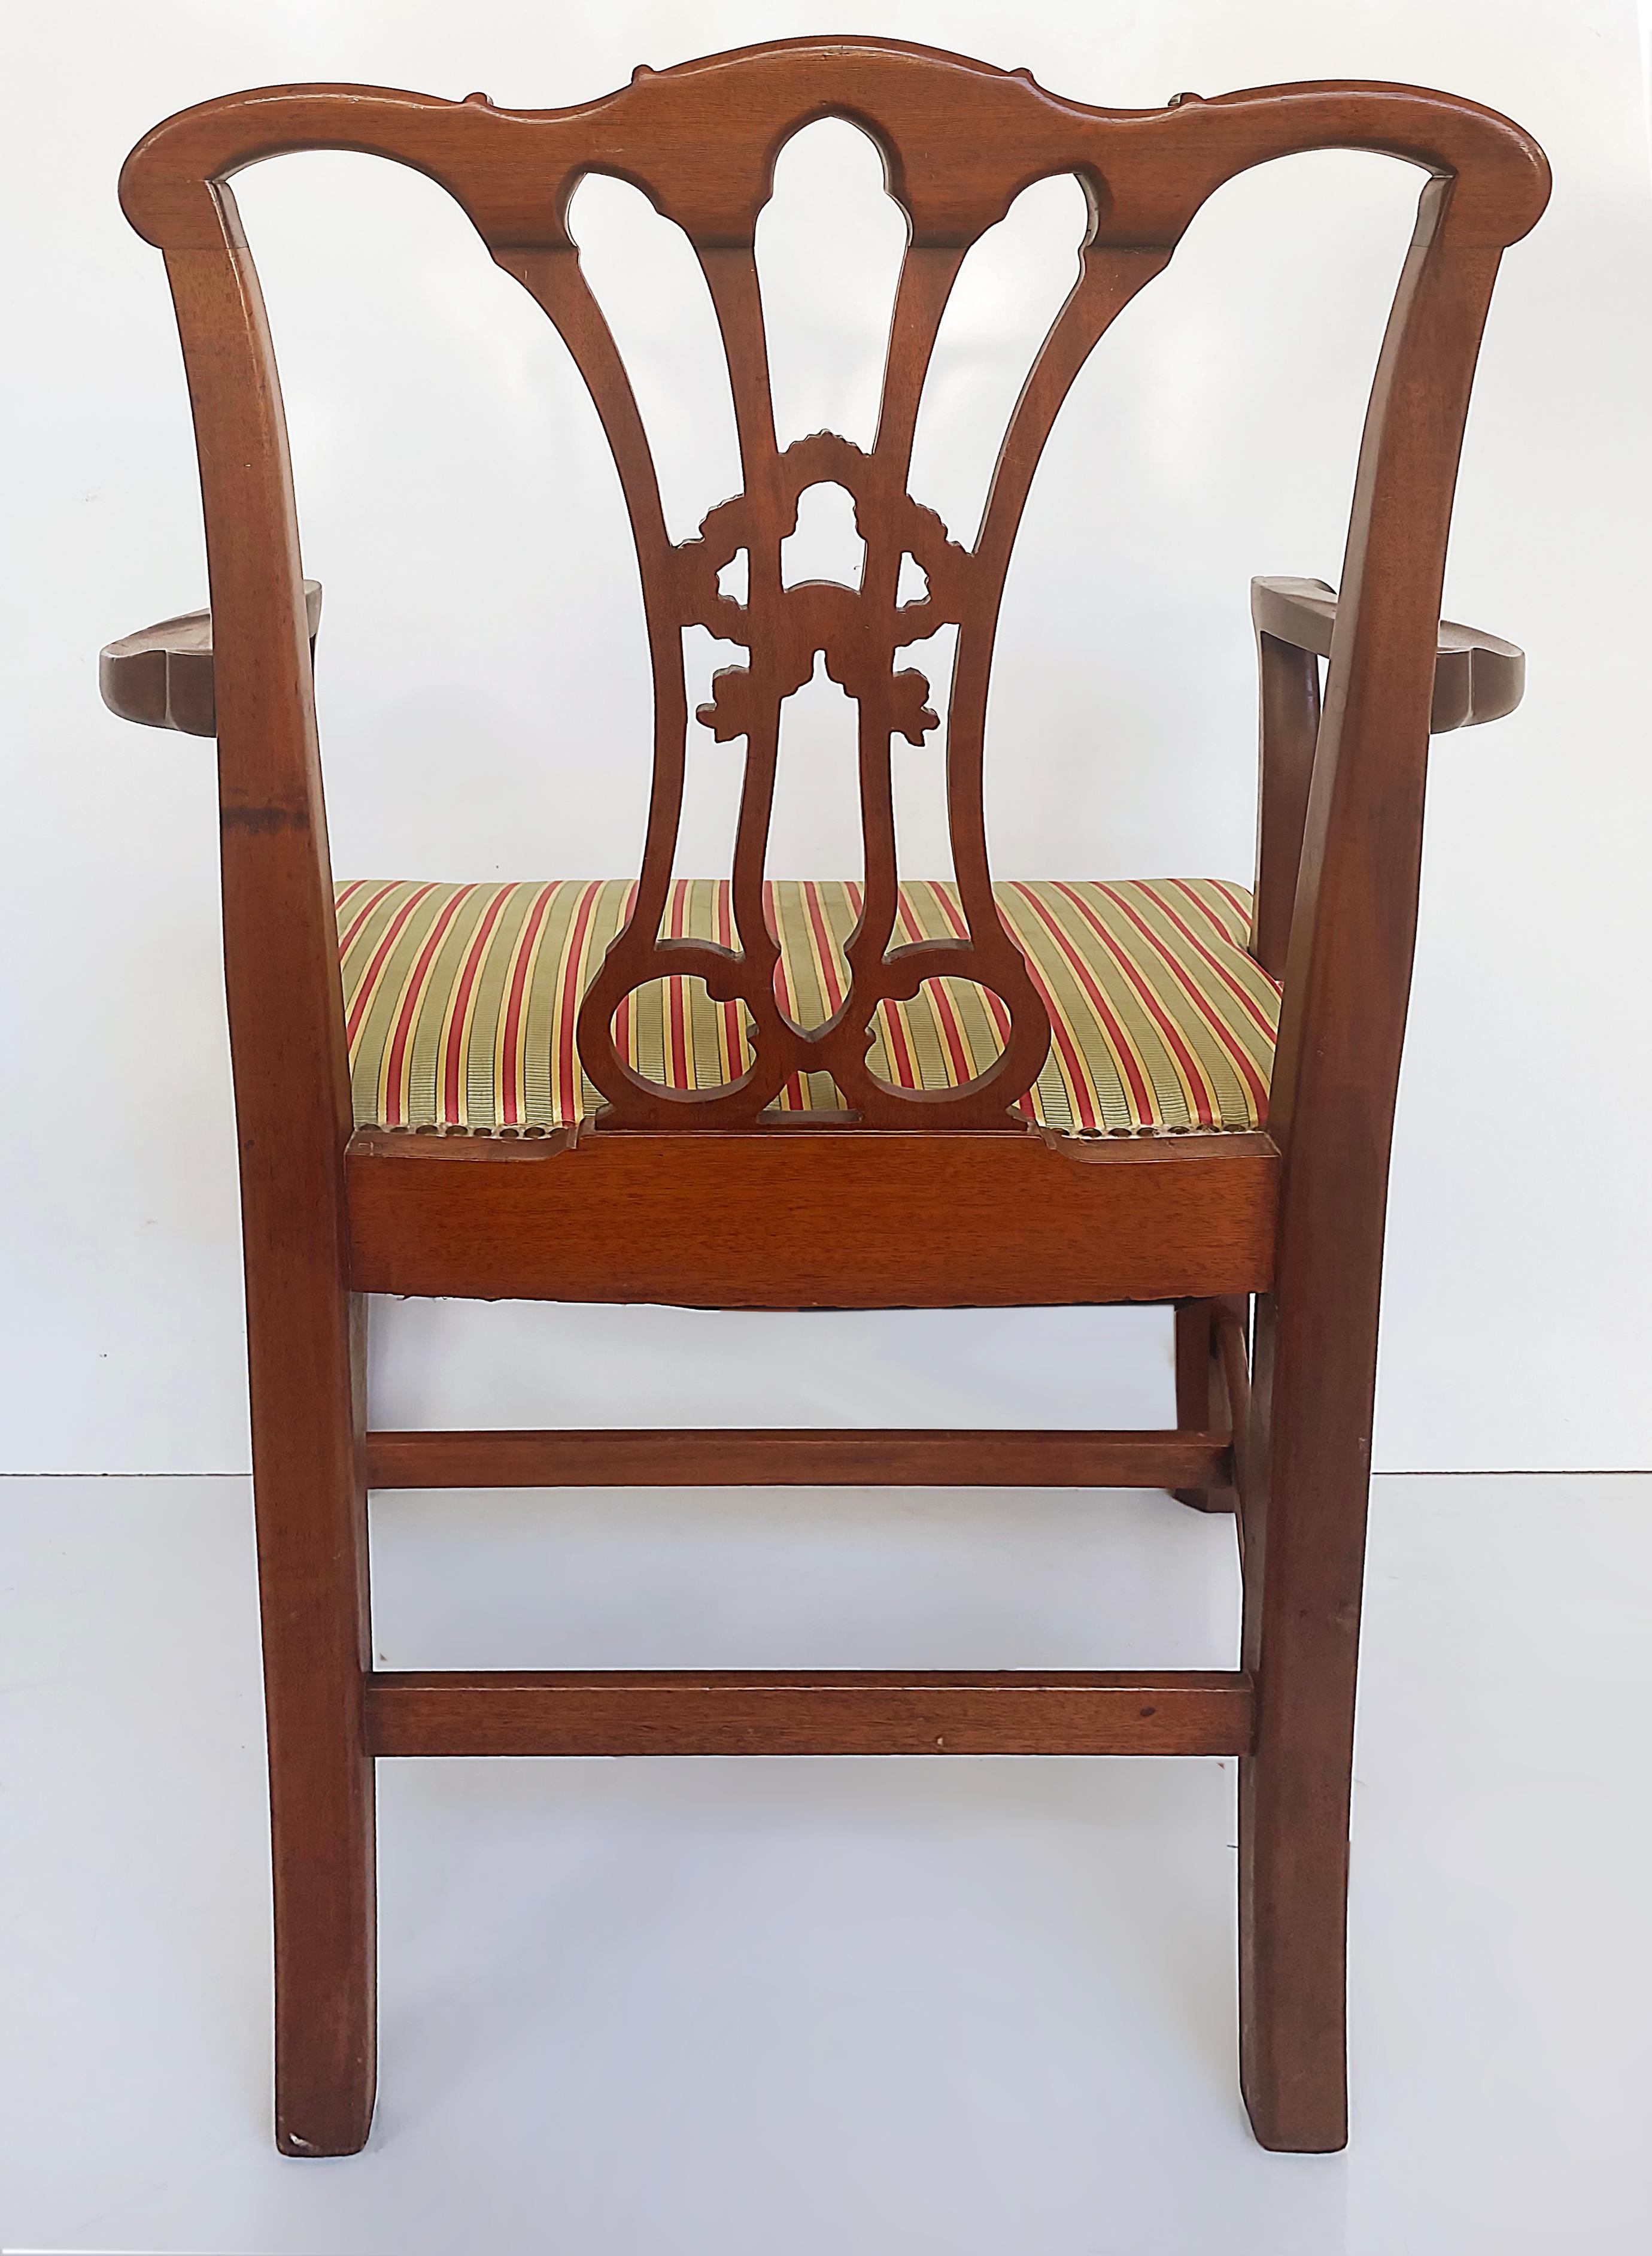 20th Century Chippendale Style Mahogany Slat Back Armchair with Upholstered Seat Cushion For Sale